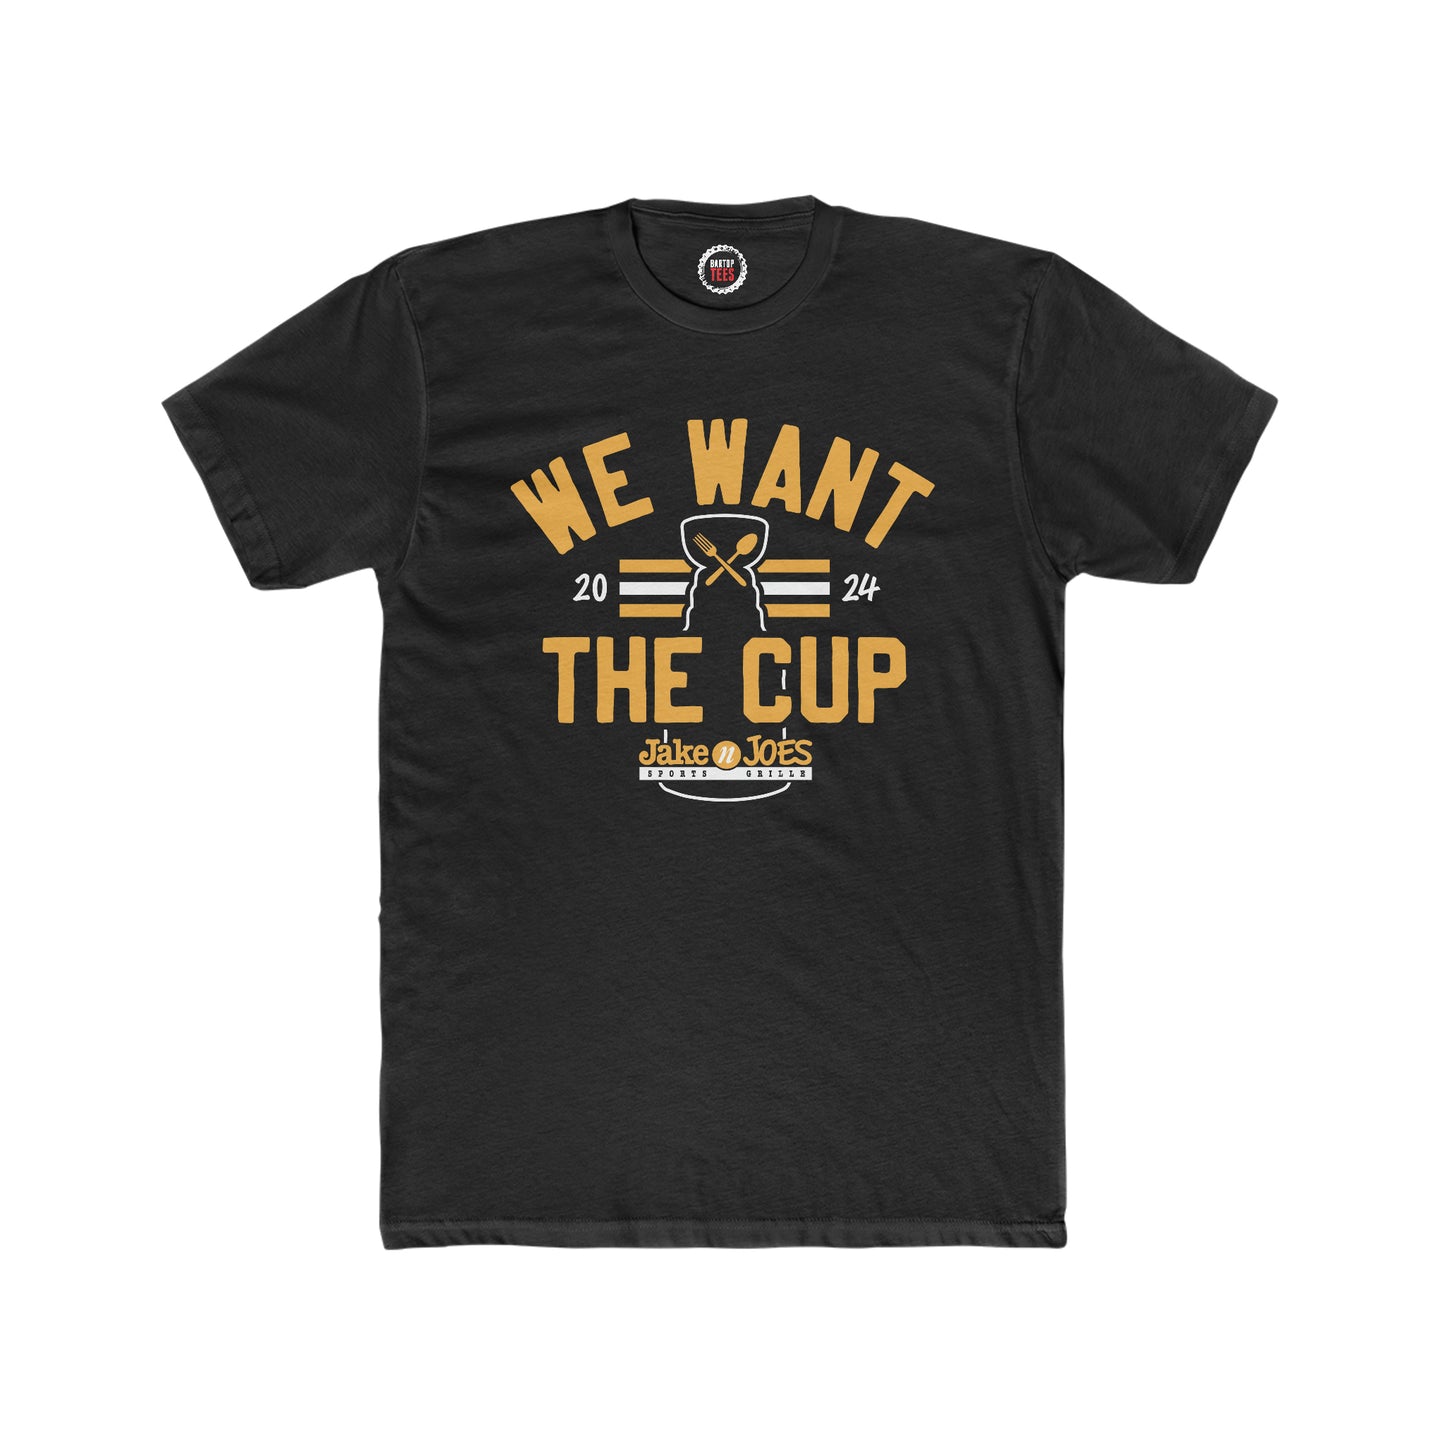 Jake n JOES Unisex T-Shirt - We Want the Cup!